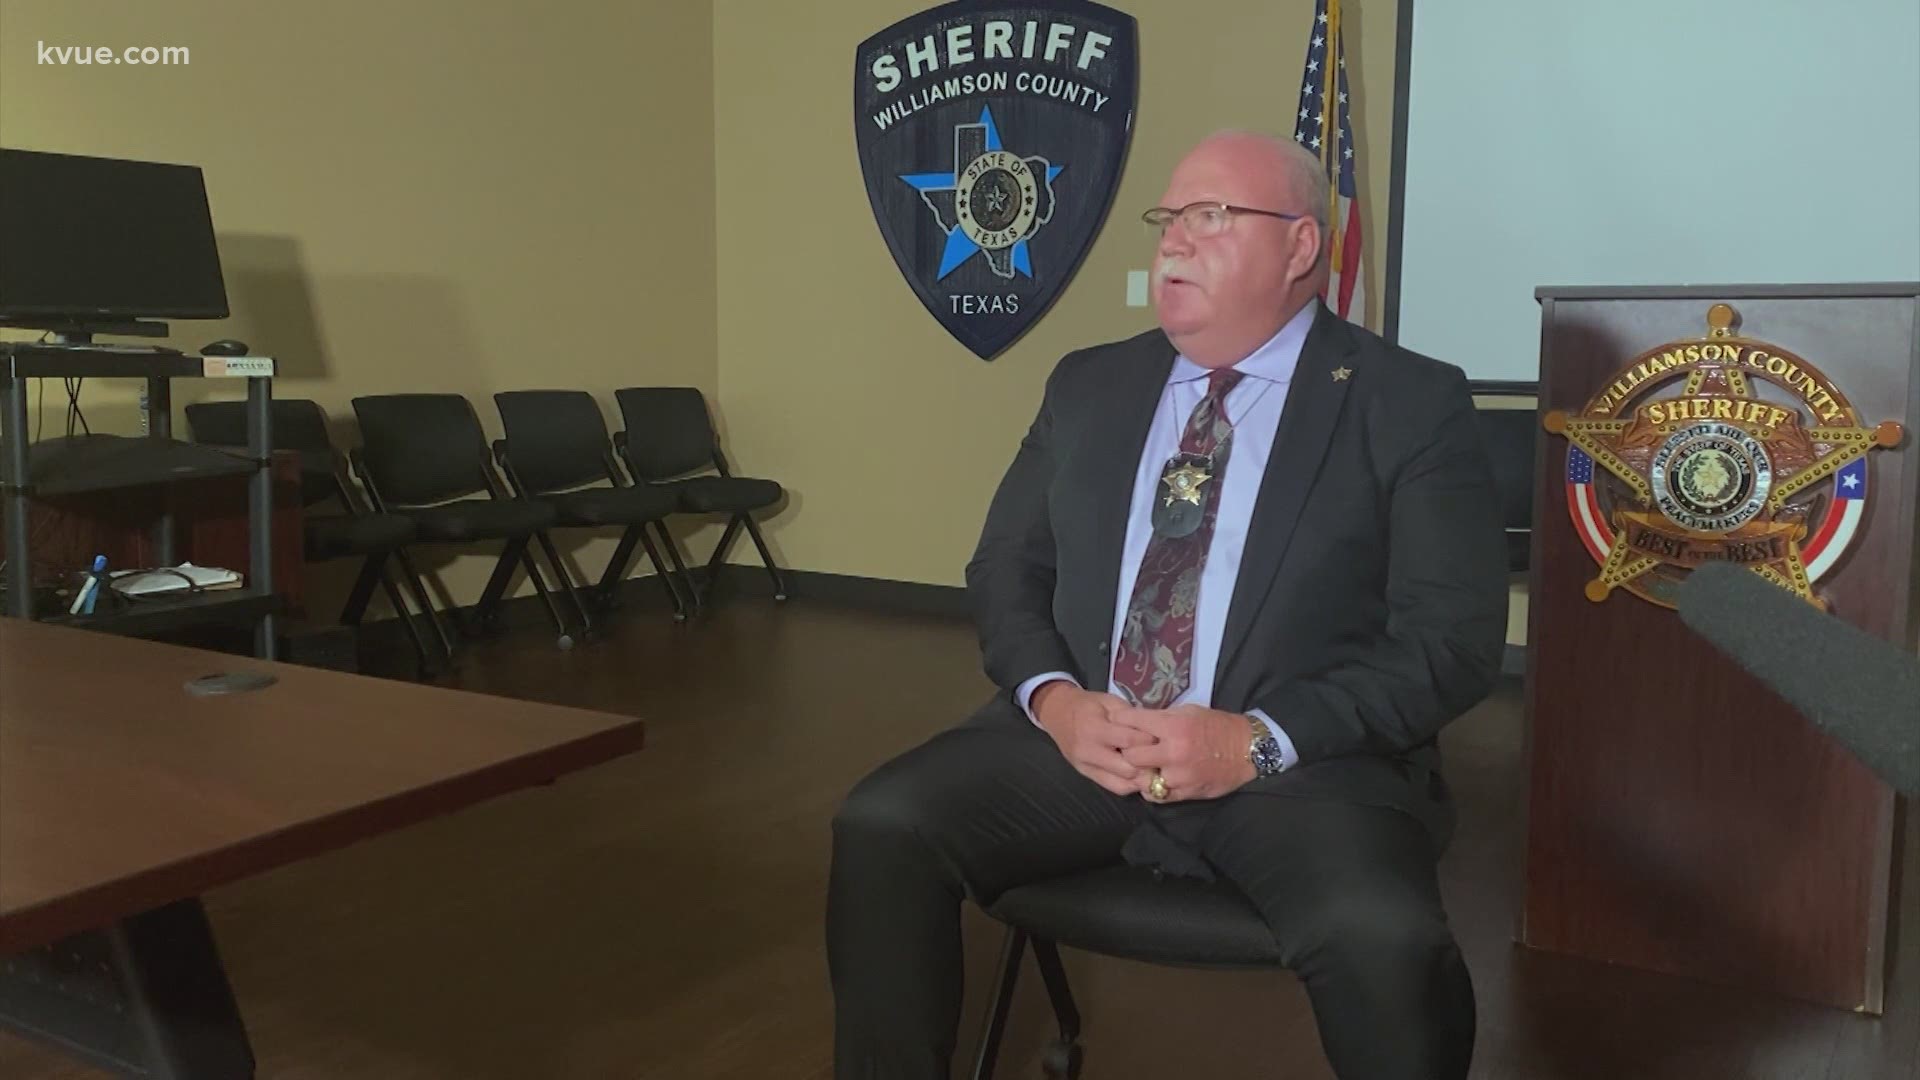 One week on the job and Williamson County Sheriff Mike Gleason has ousted 19 deputies and other employees as he ushers in a reboot of the department.